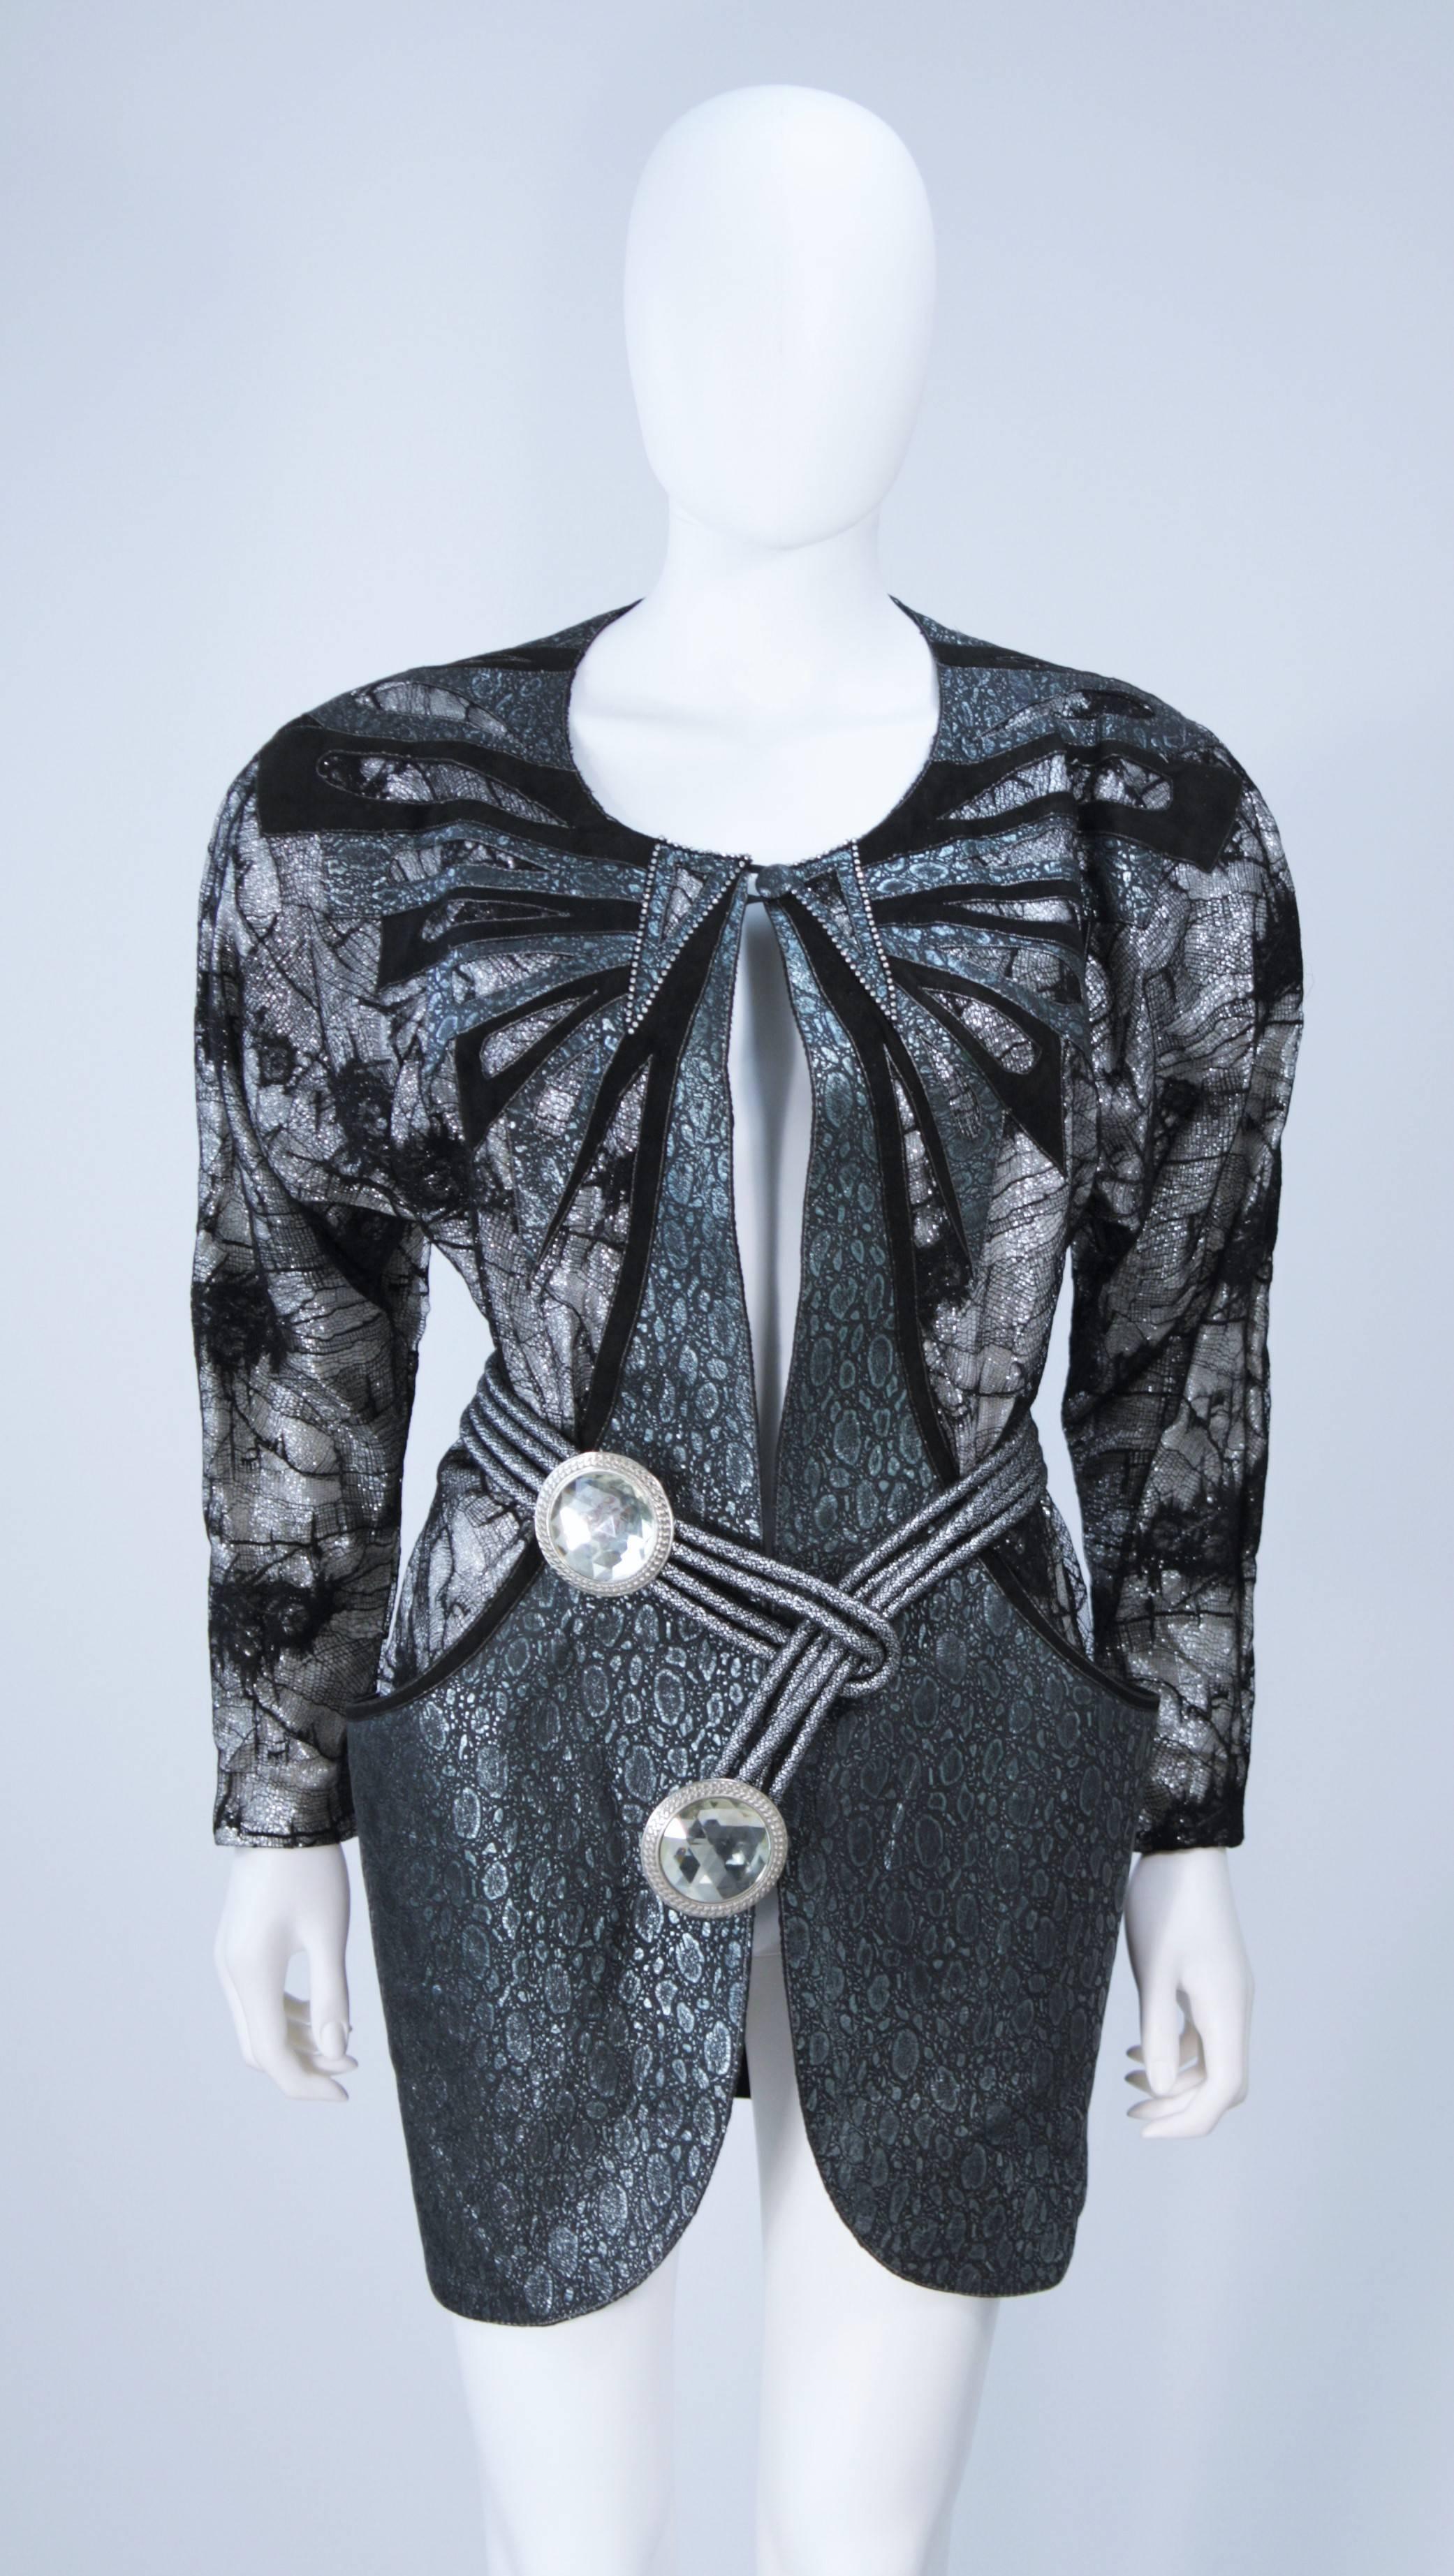  This Roberto Cavalli jacket is composed of a metallic lace and suede combination. Features a center front button closure, shoulder pads, and side pockets. There is a large jeweled belt with silver hue metal. In excellent vintage